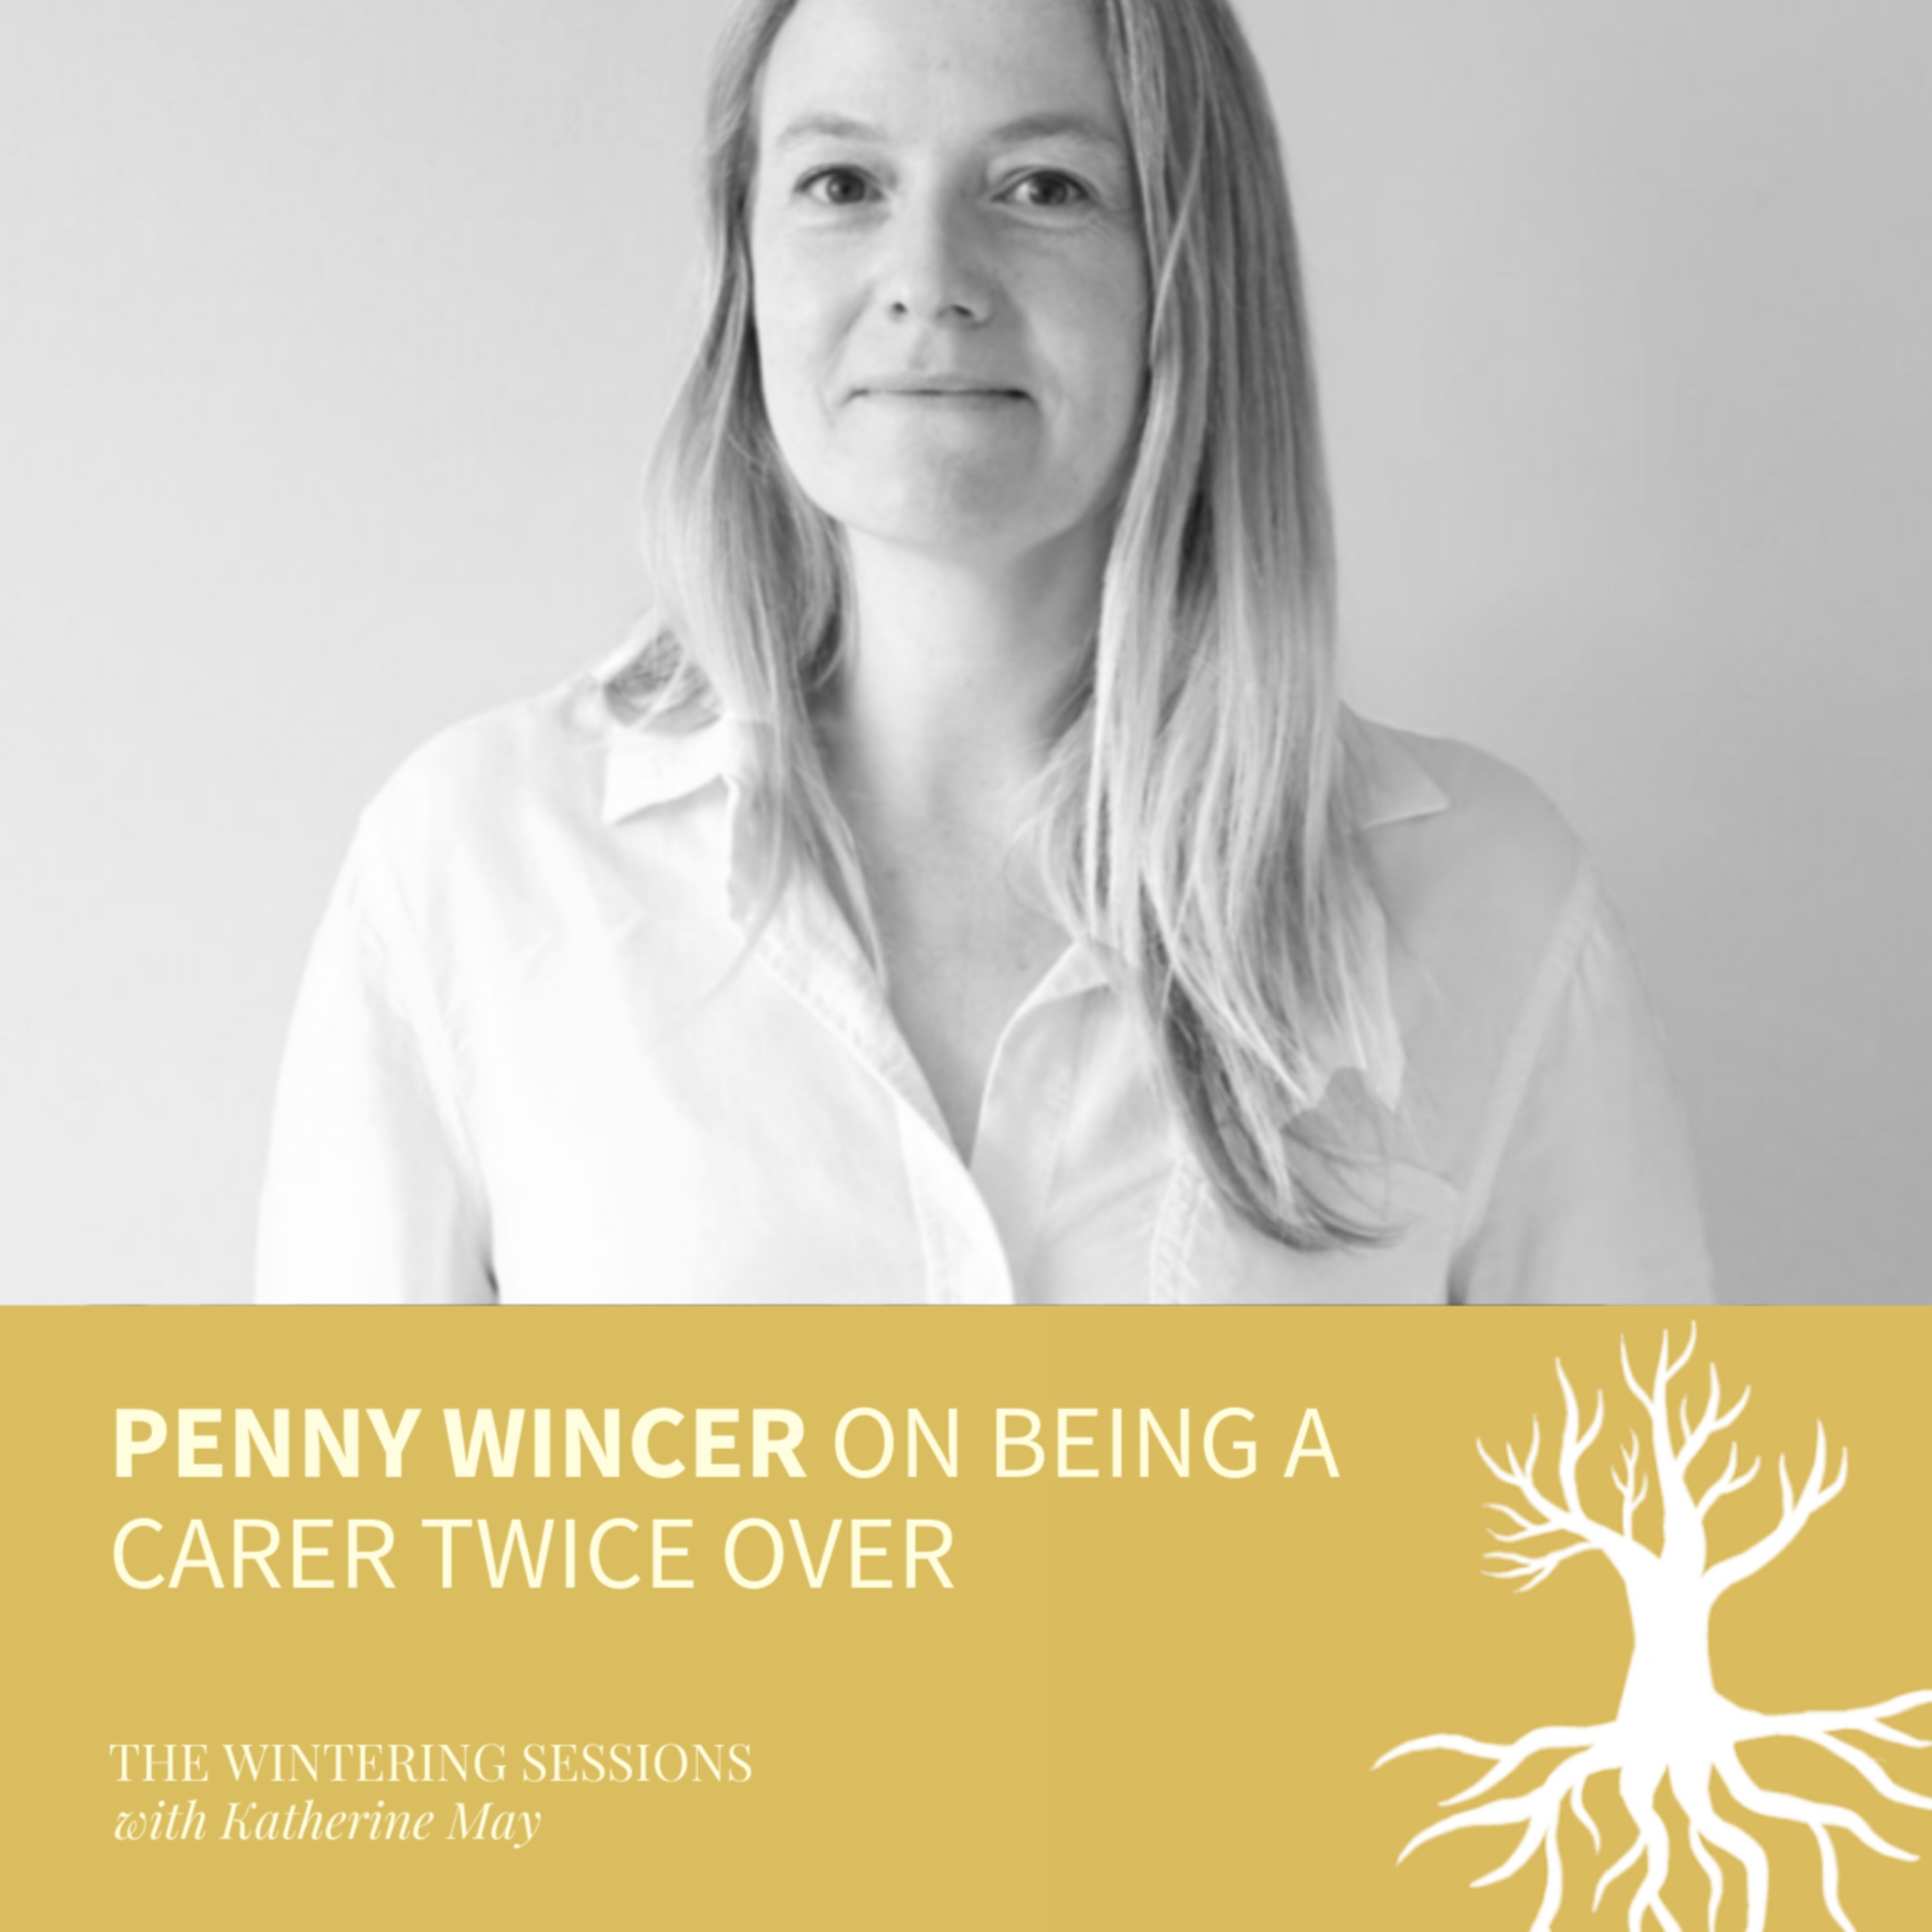 Penny Wincer on being a carer twice over